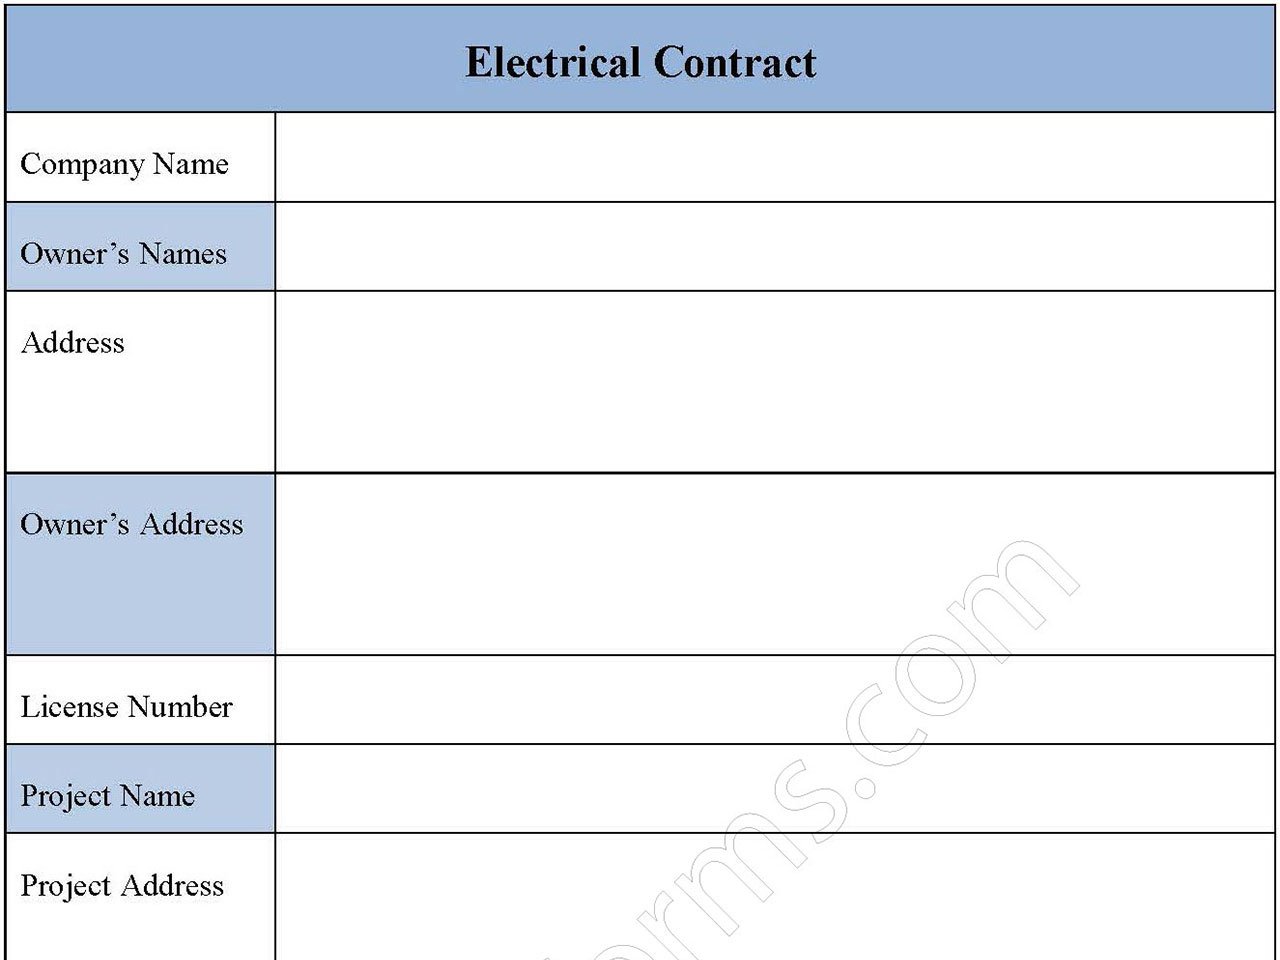 Electrical Contract form